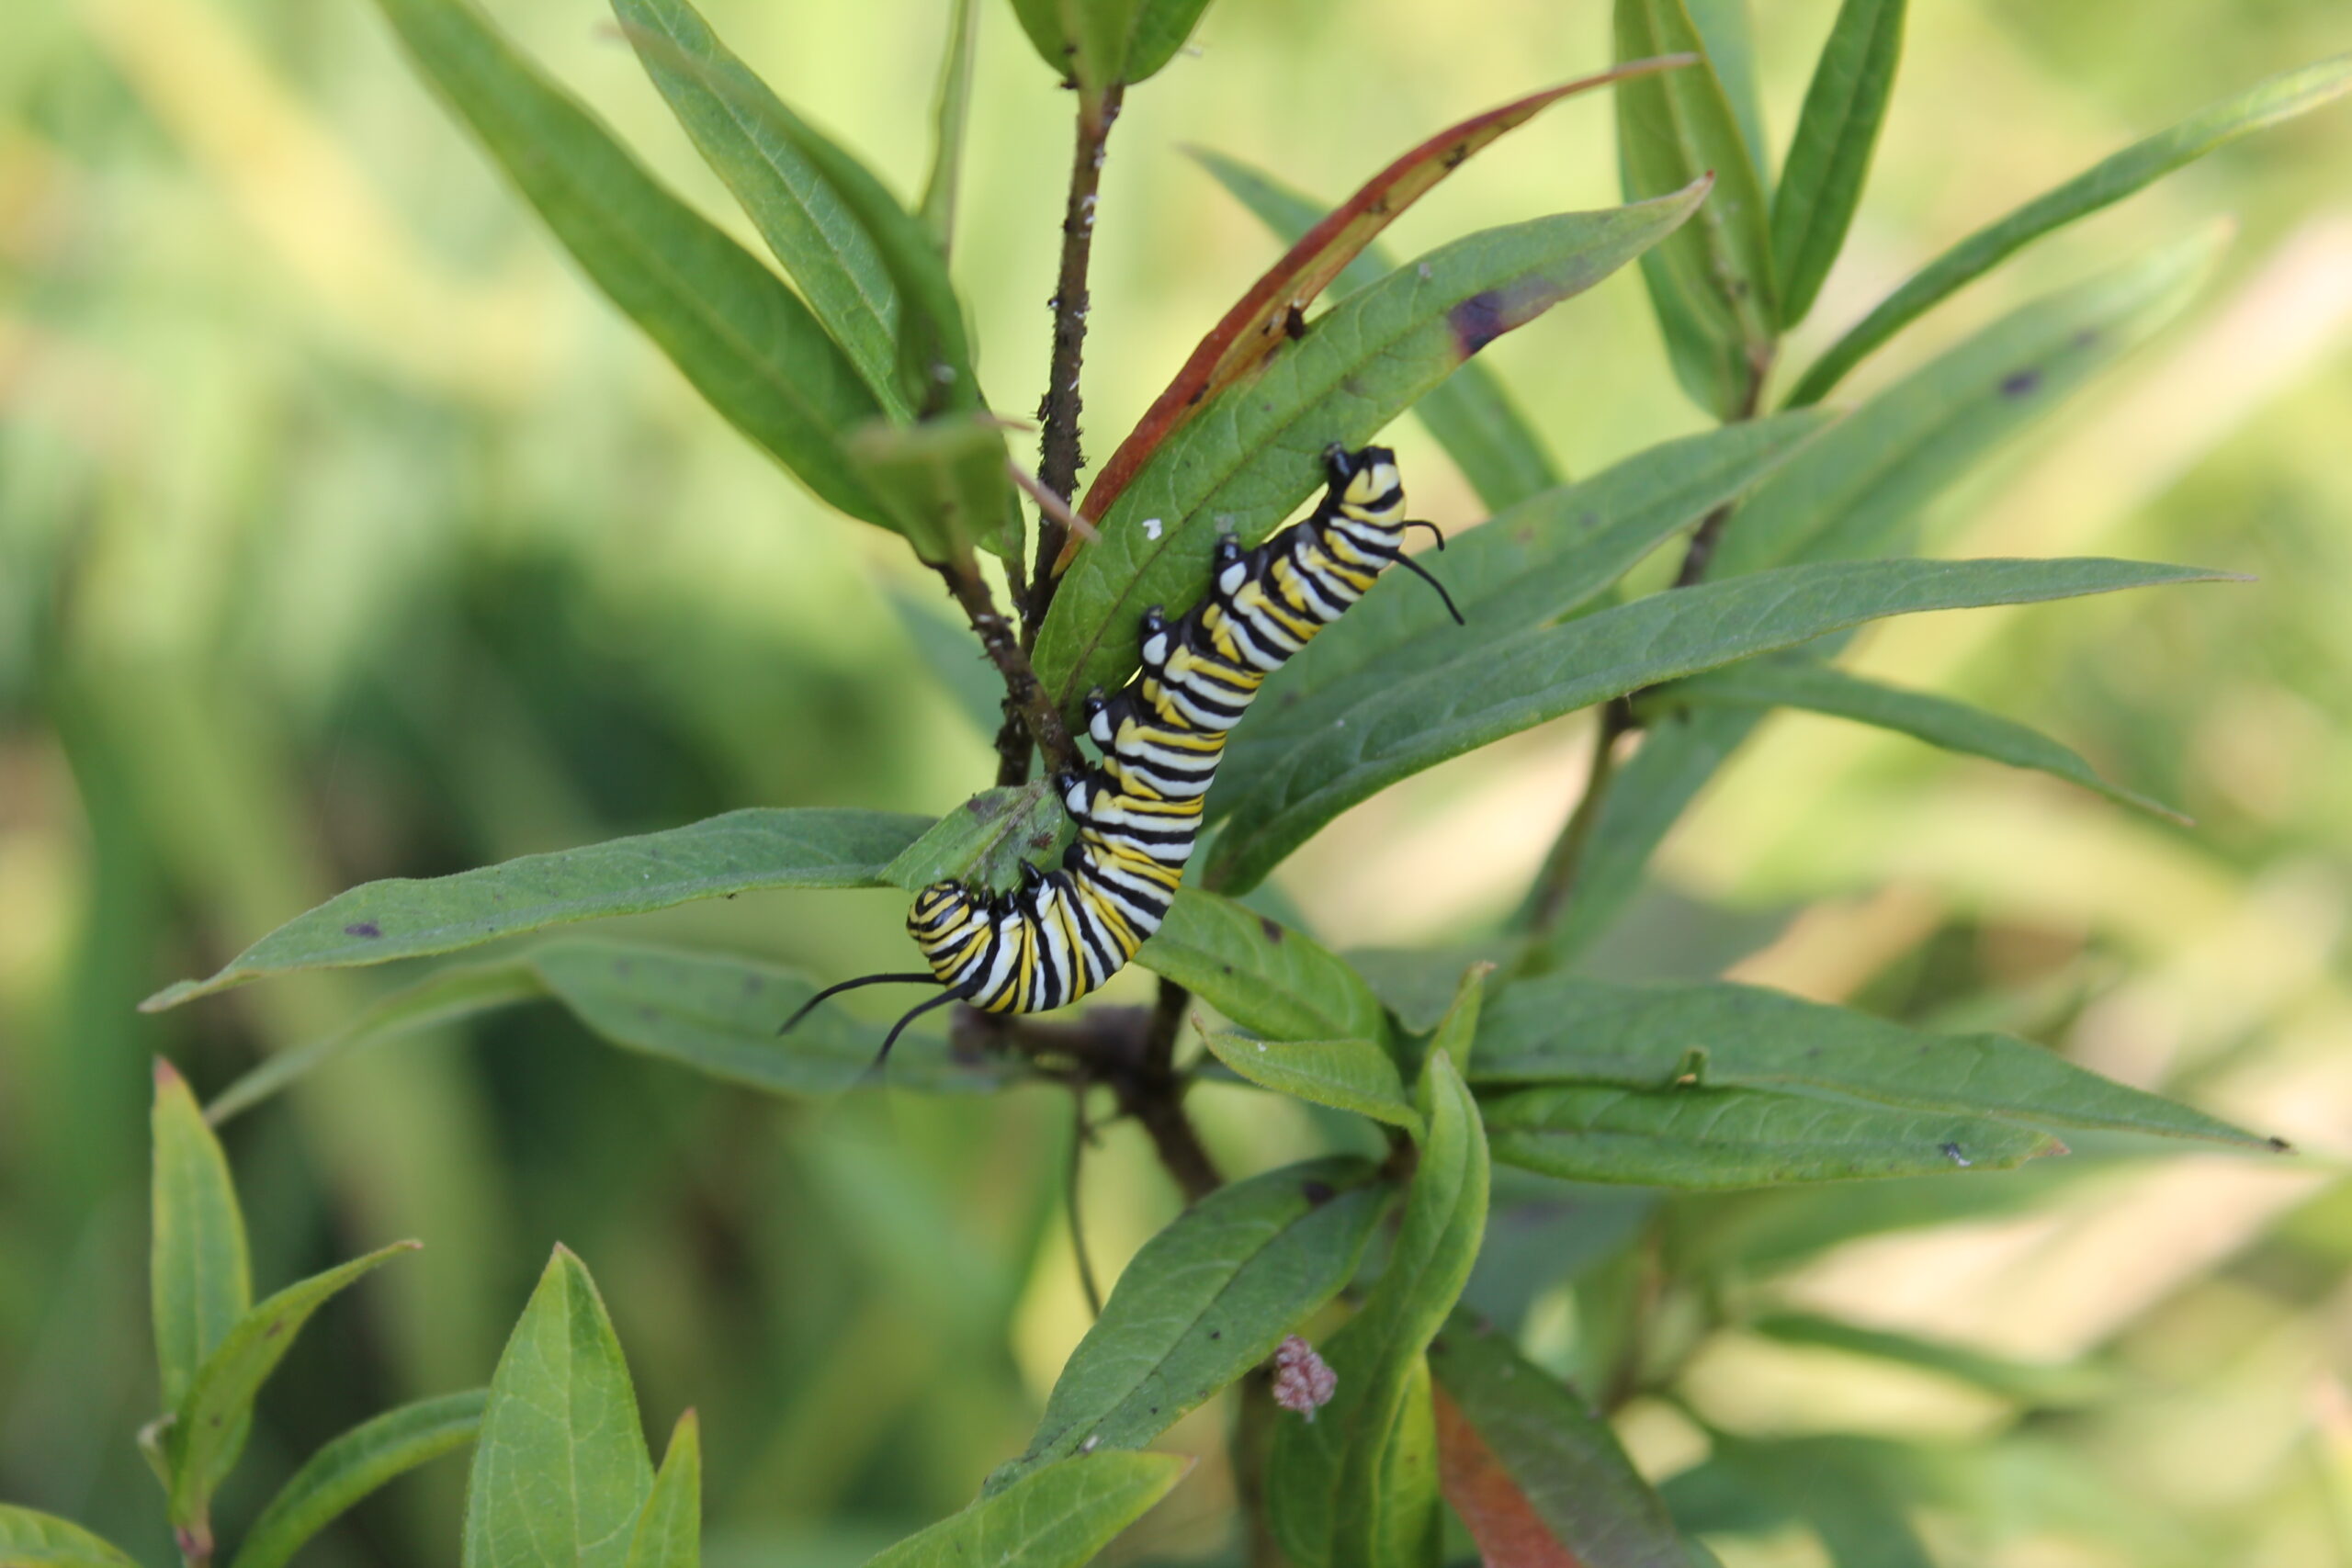 A Monarch caterpillar is eating the leaves of a milkweed plant.